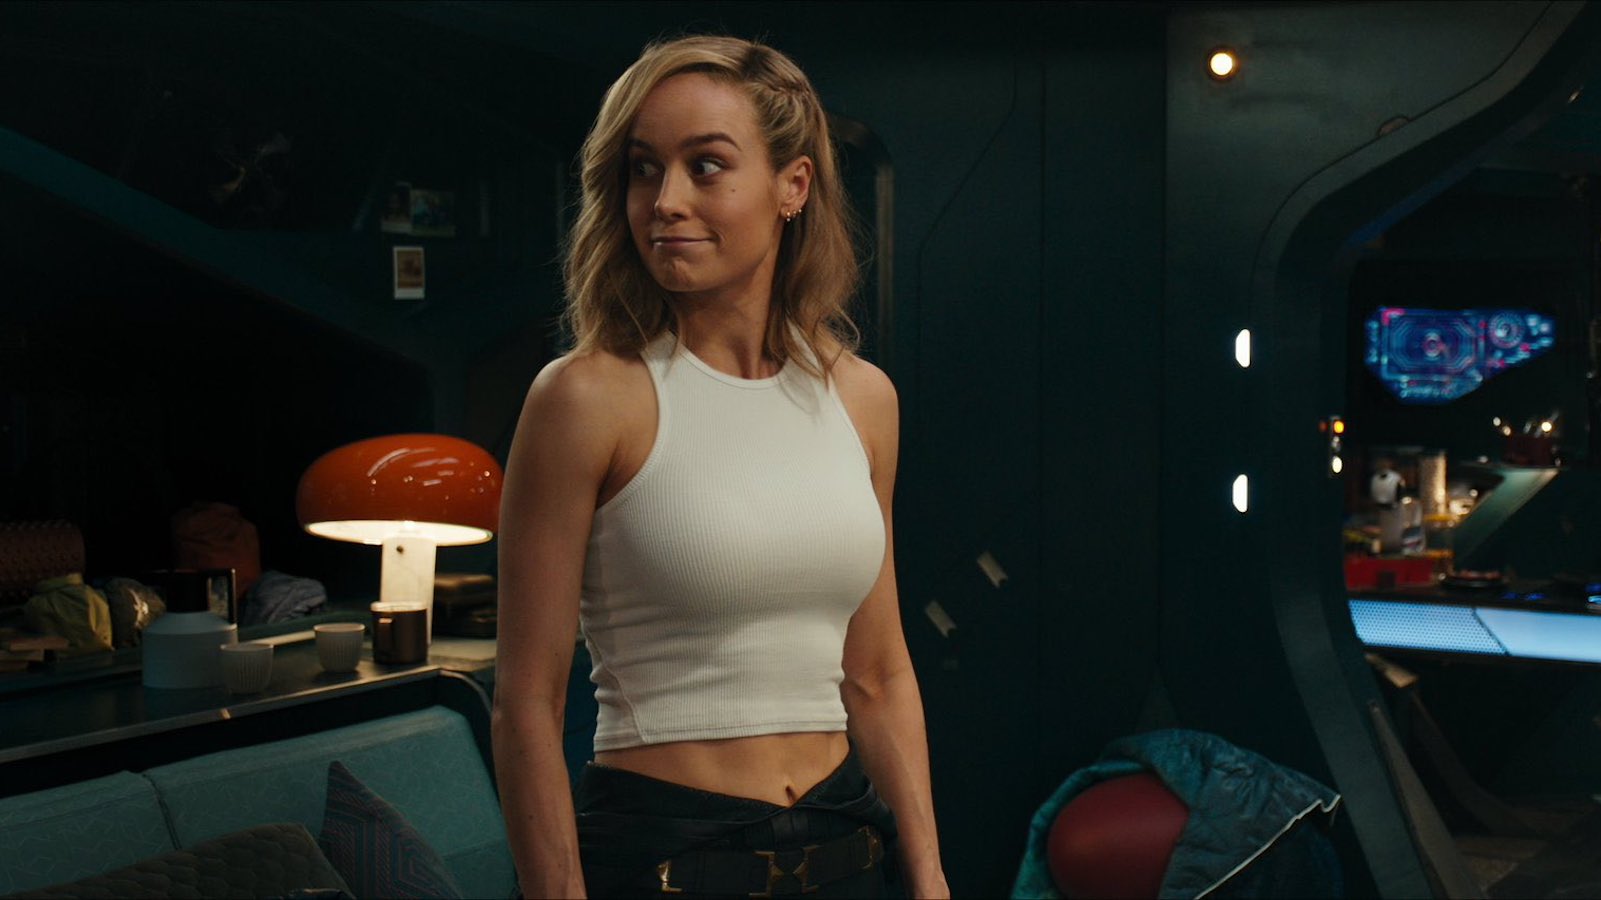 A Superhero Has Never Looked Better Than Brie Larson